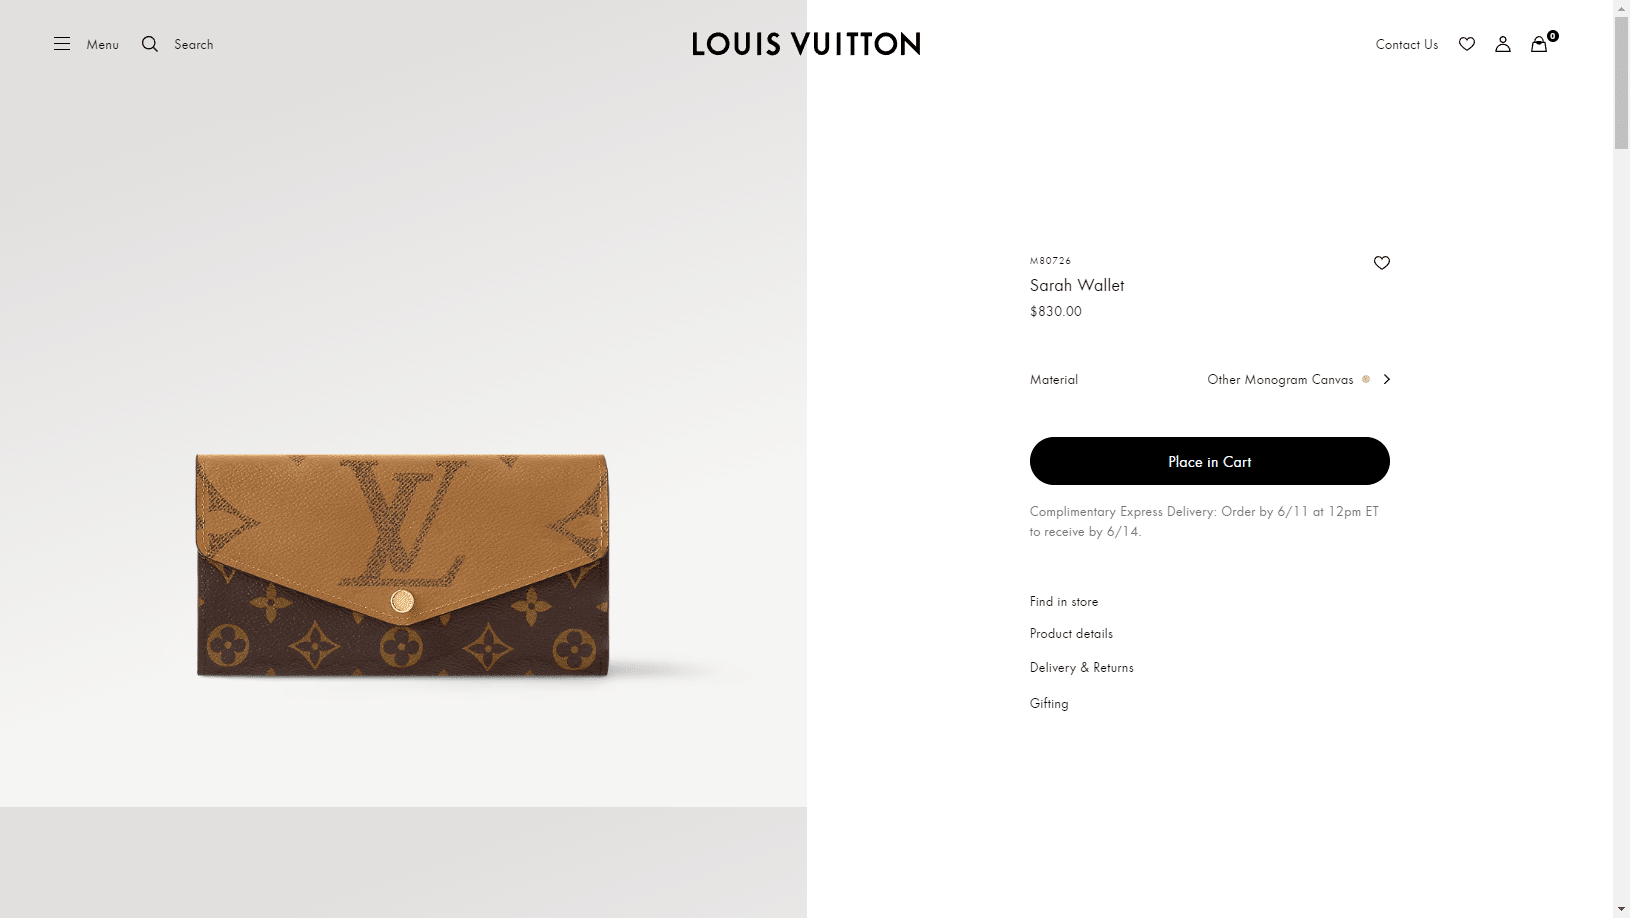 Sarah-Wallet-Other-Monogram-Canvas-Women-Small-Leather-Goods-LOUIS-VUITTON--3.png